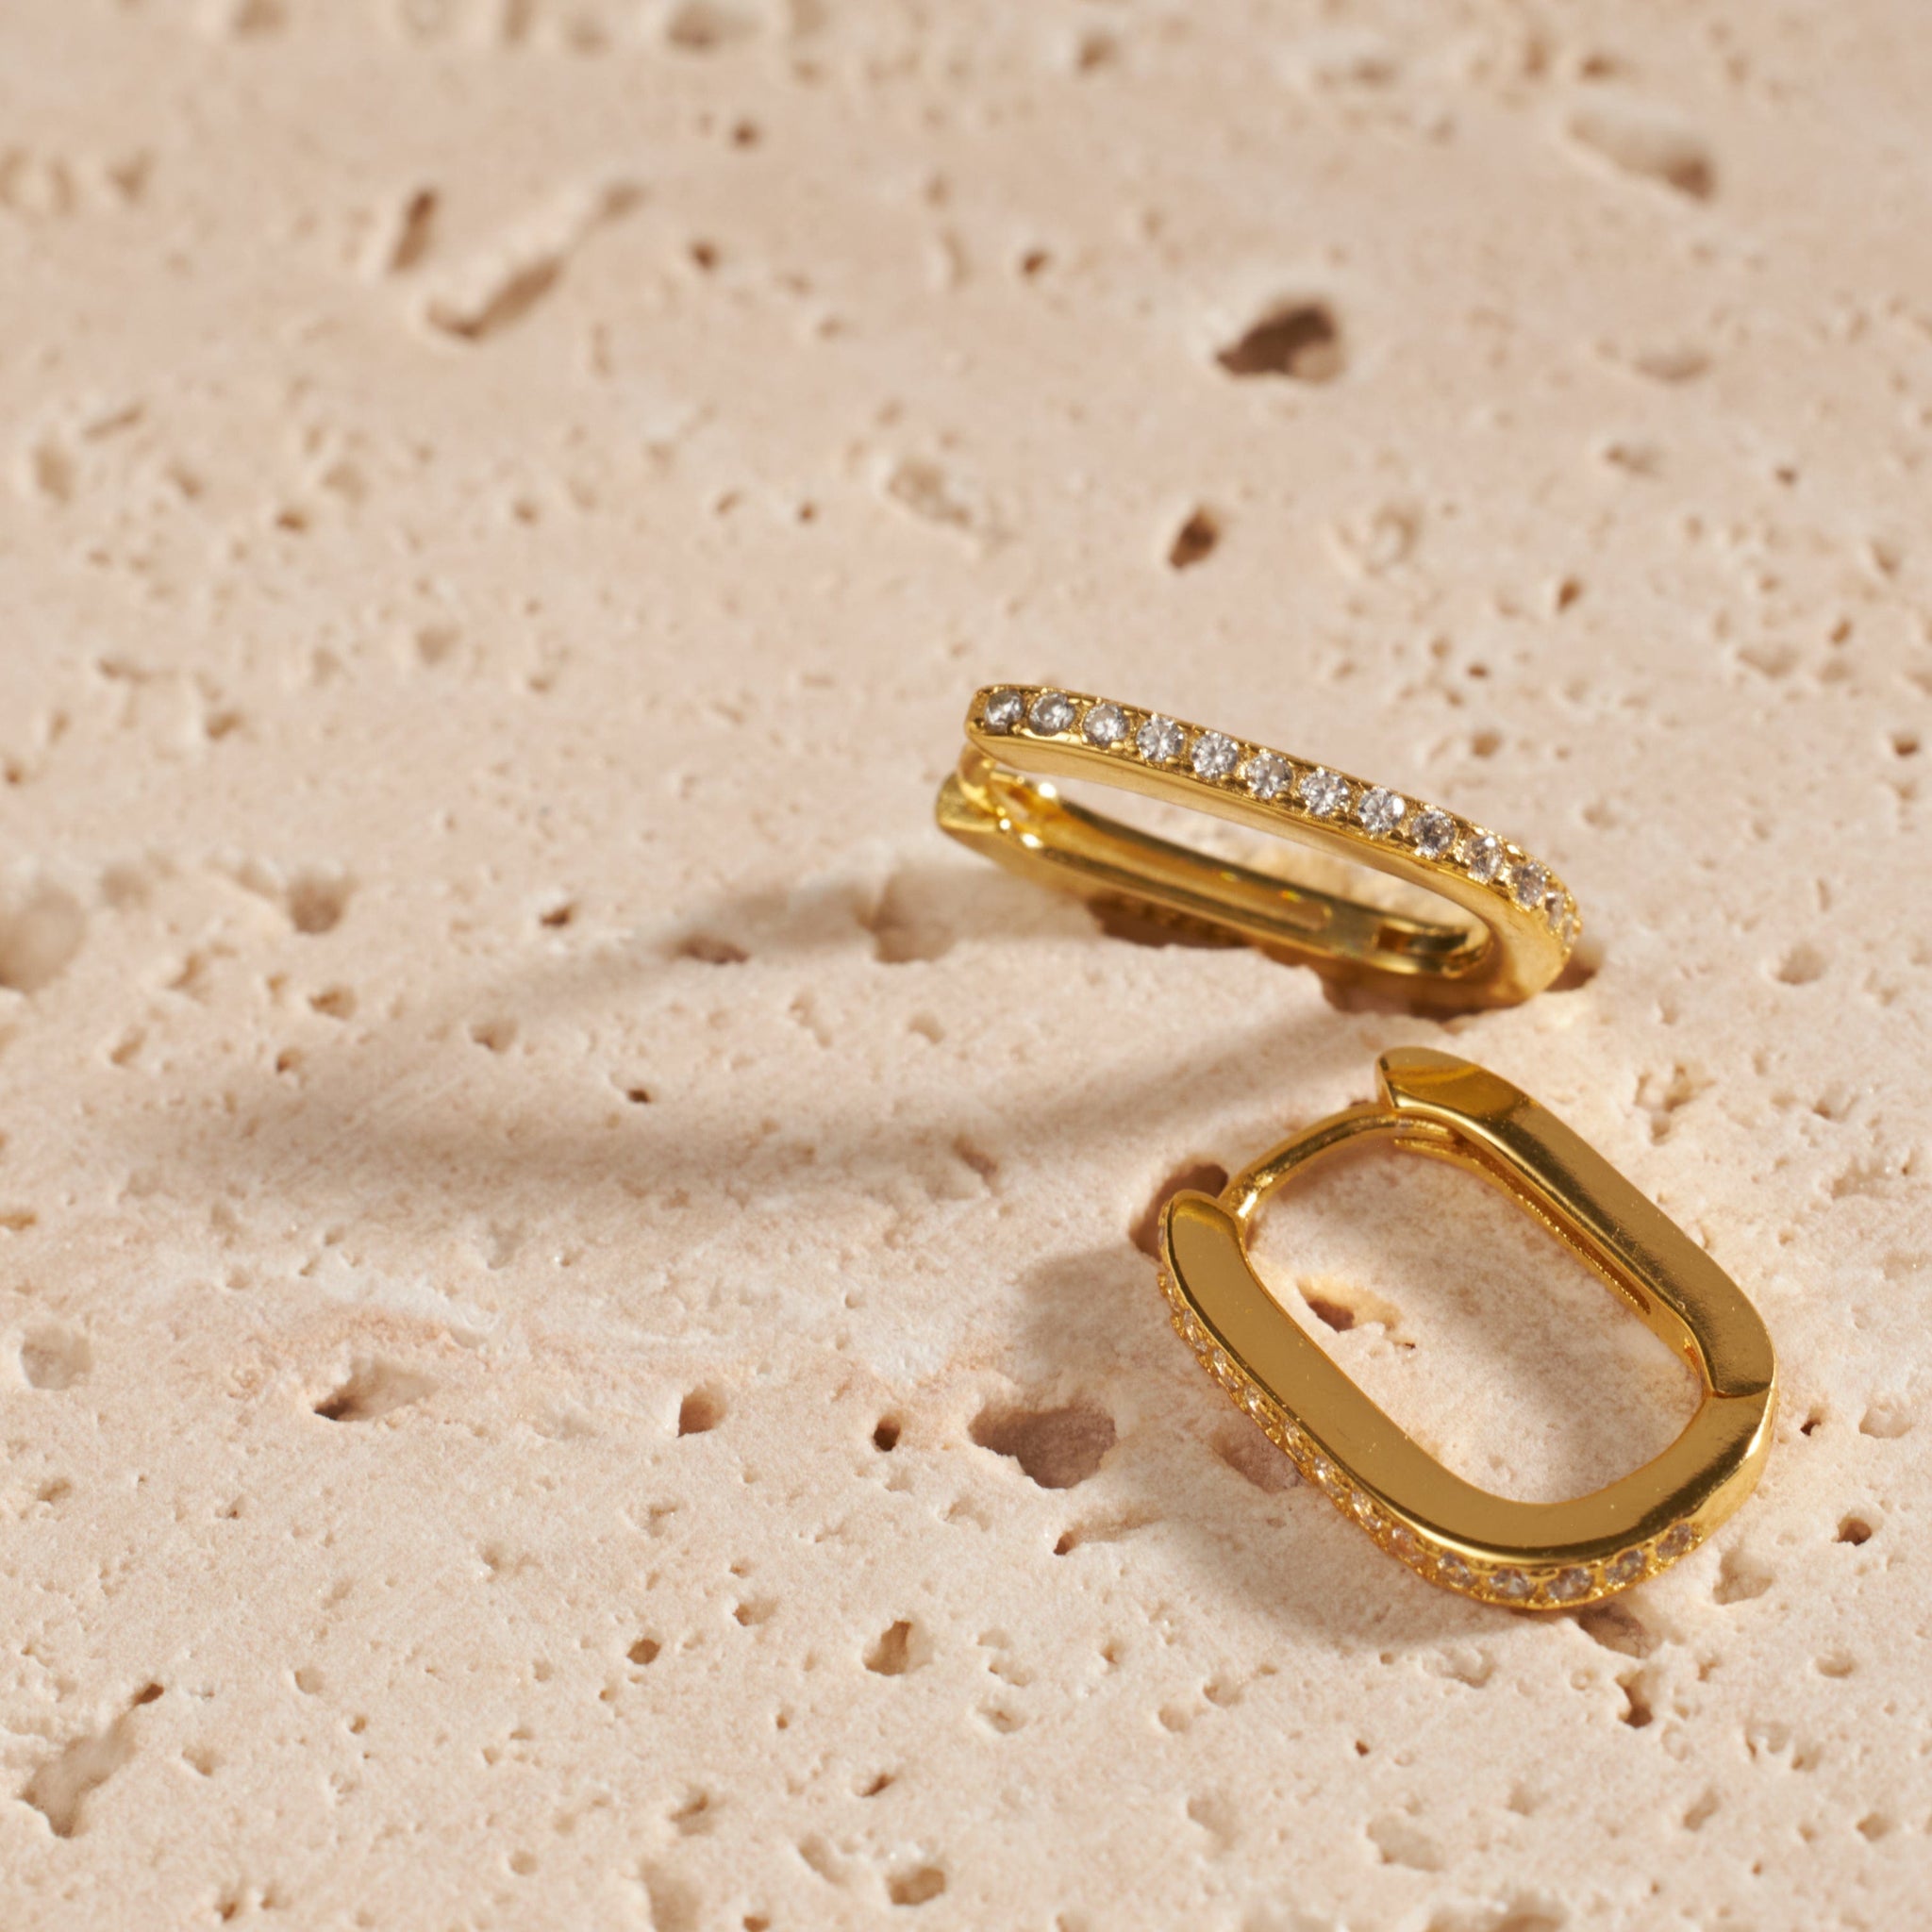 A pair of Positano Scintilla Huggie earrings is displayed side-by-side, one laying flat to show off the oval shape while the other sits on the side to display the sparkling crystal accents. 